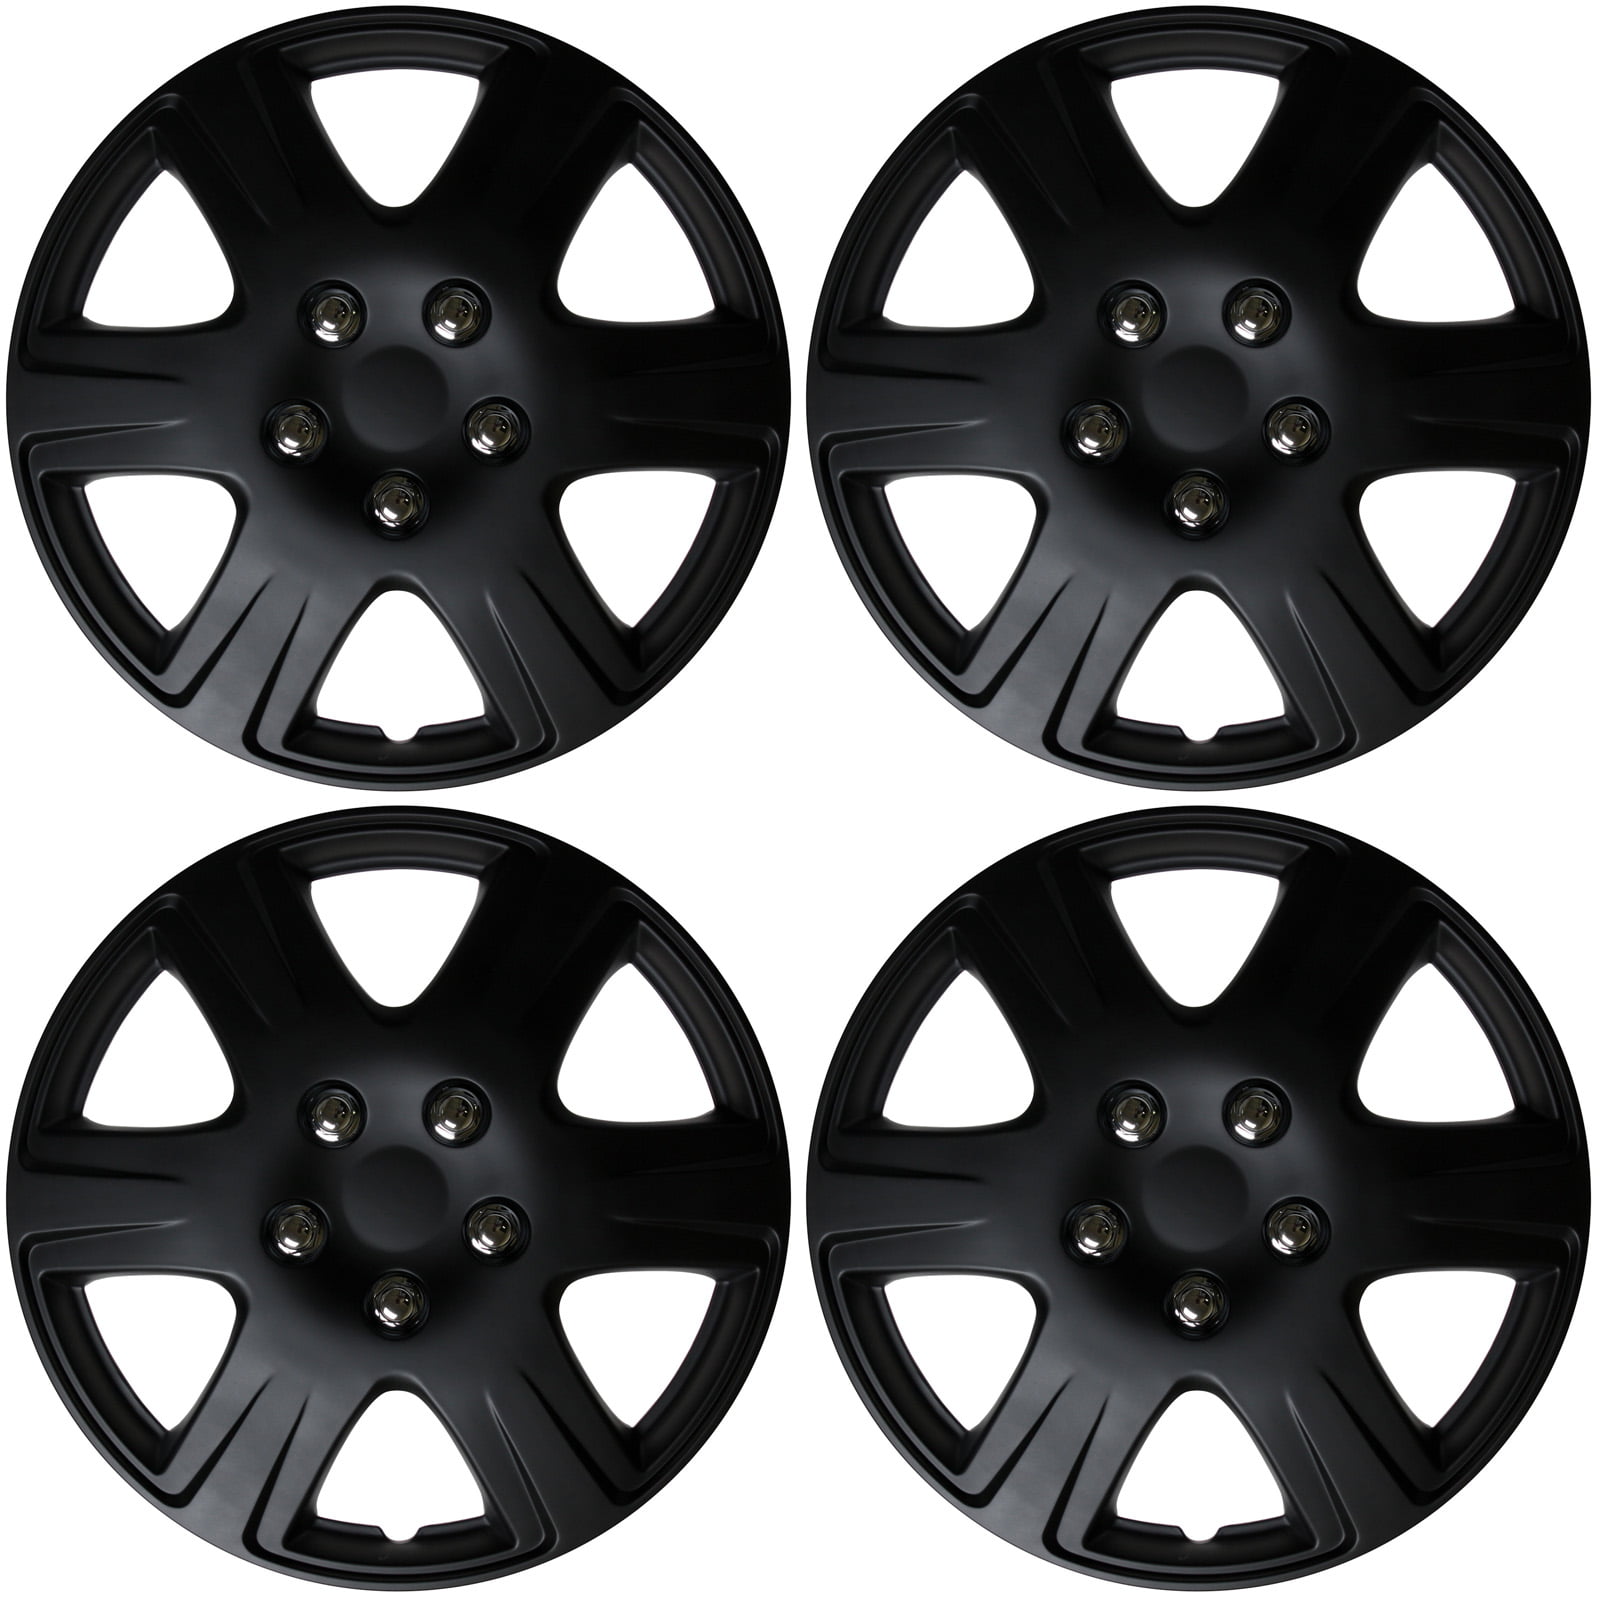 16" Inch Hubcaps Wheel Rim Cover Matt Black with Blue for Ford Fiesta Set